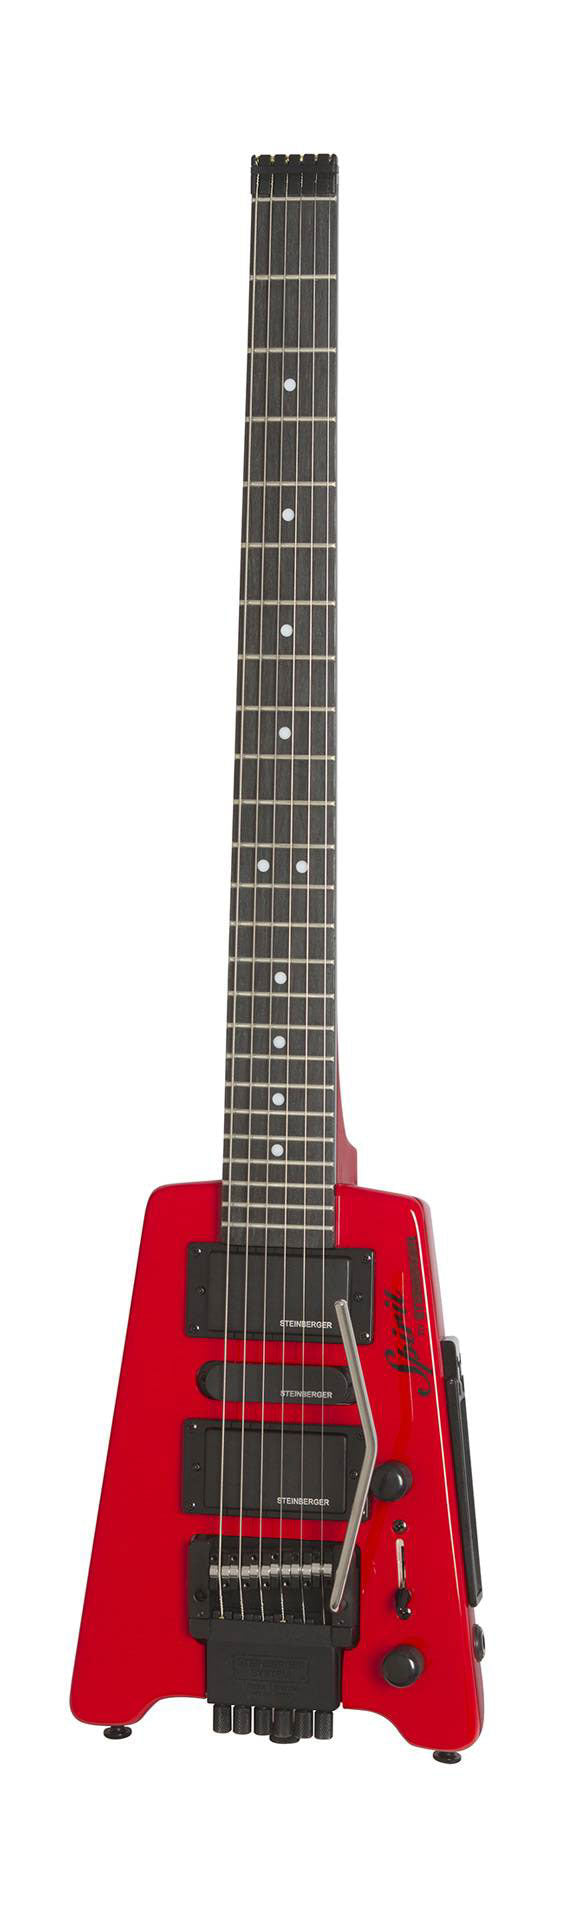 Steinberger Spirit GT-PRO Deluxe Electric Guitar in Hot Rod Red ...